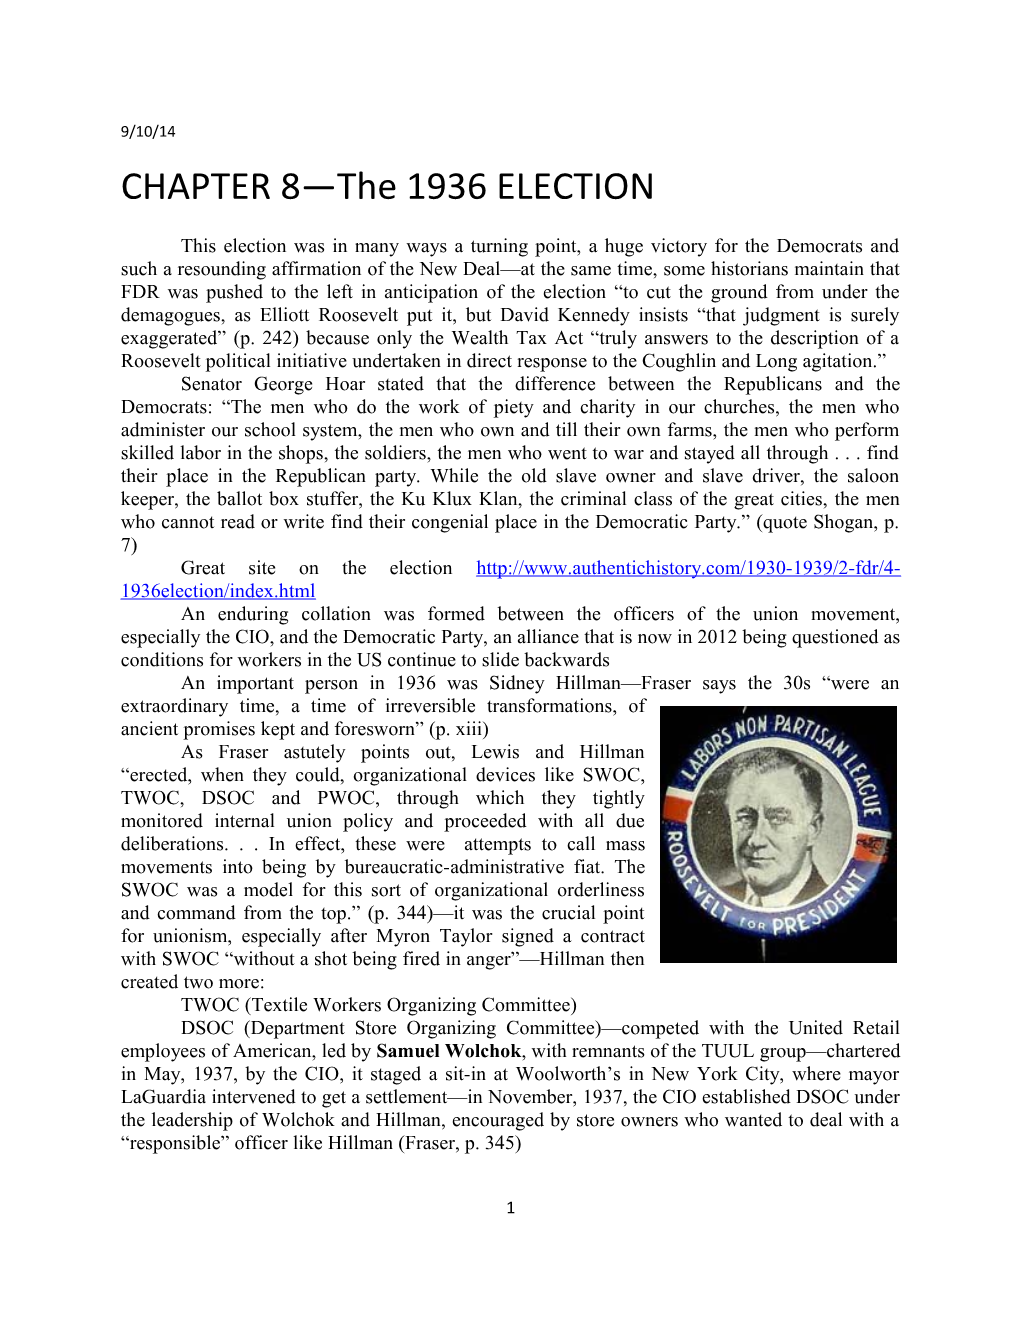 CHAPTER 8 the 1936 ELECTION